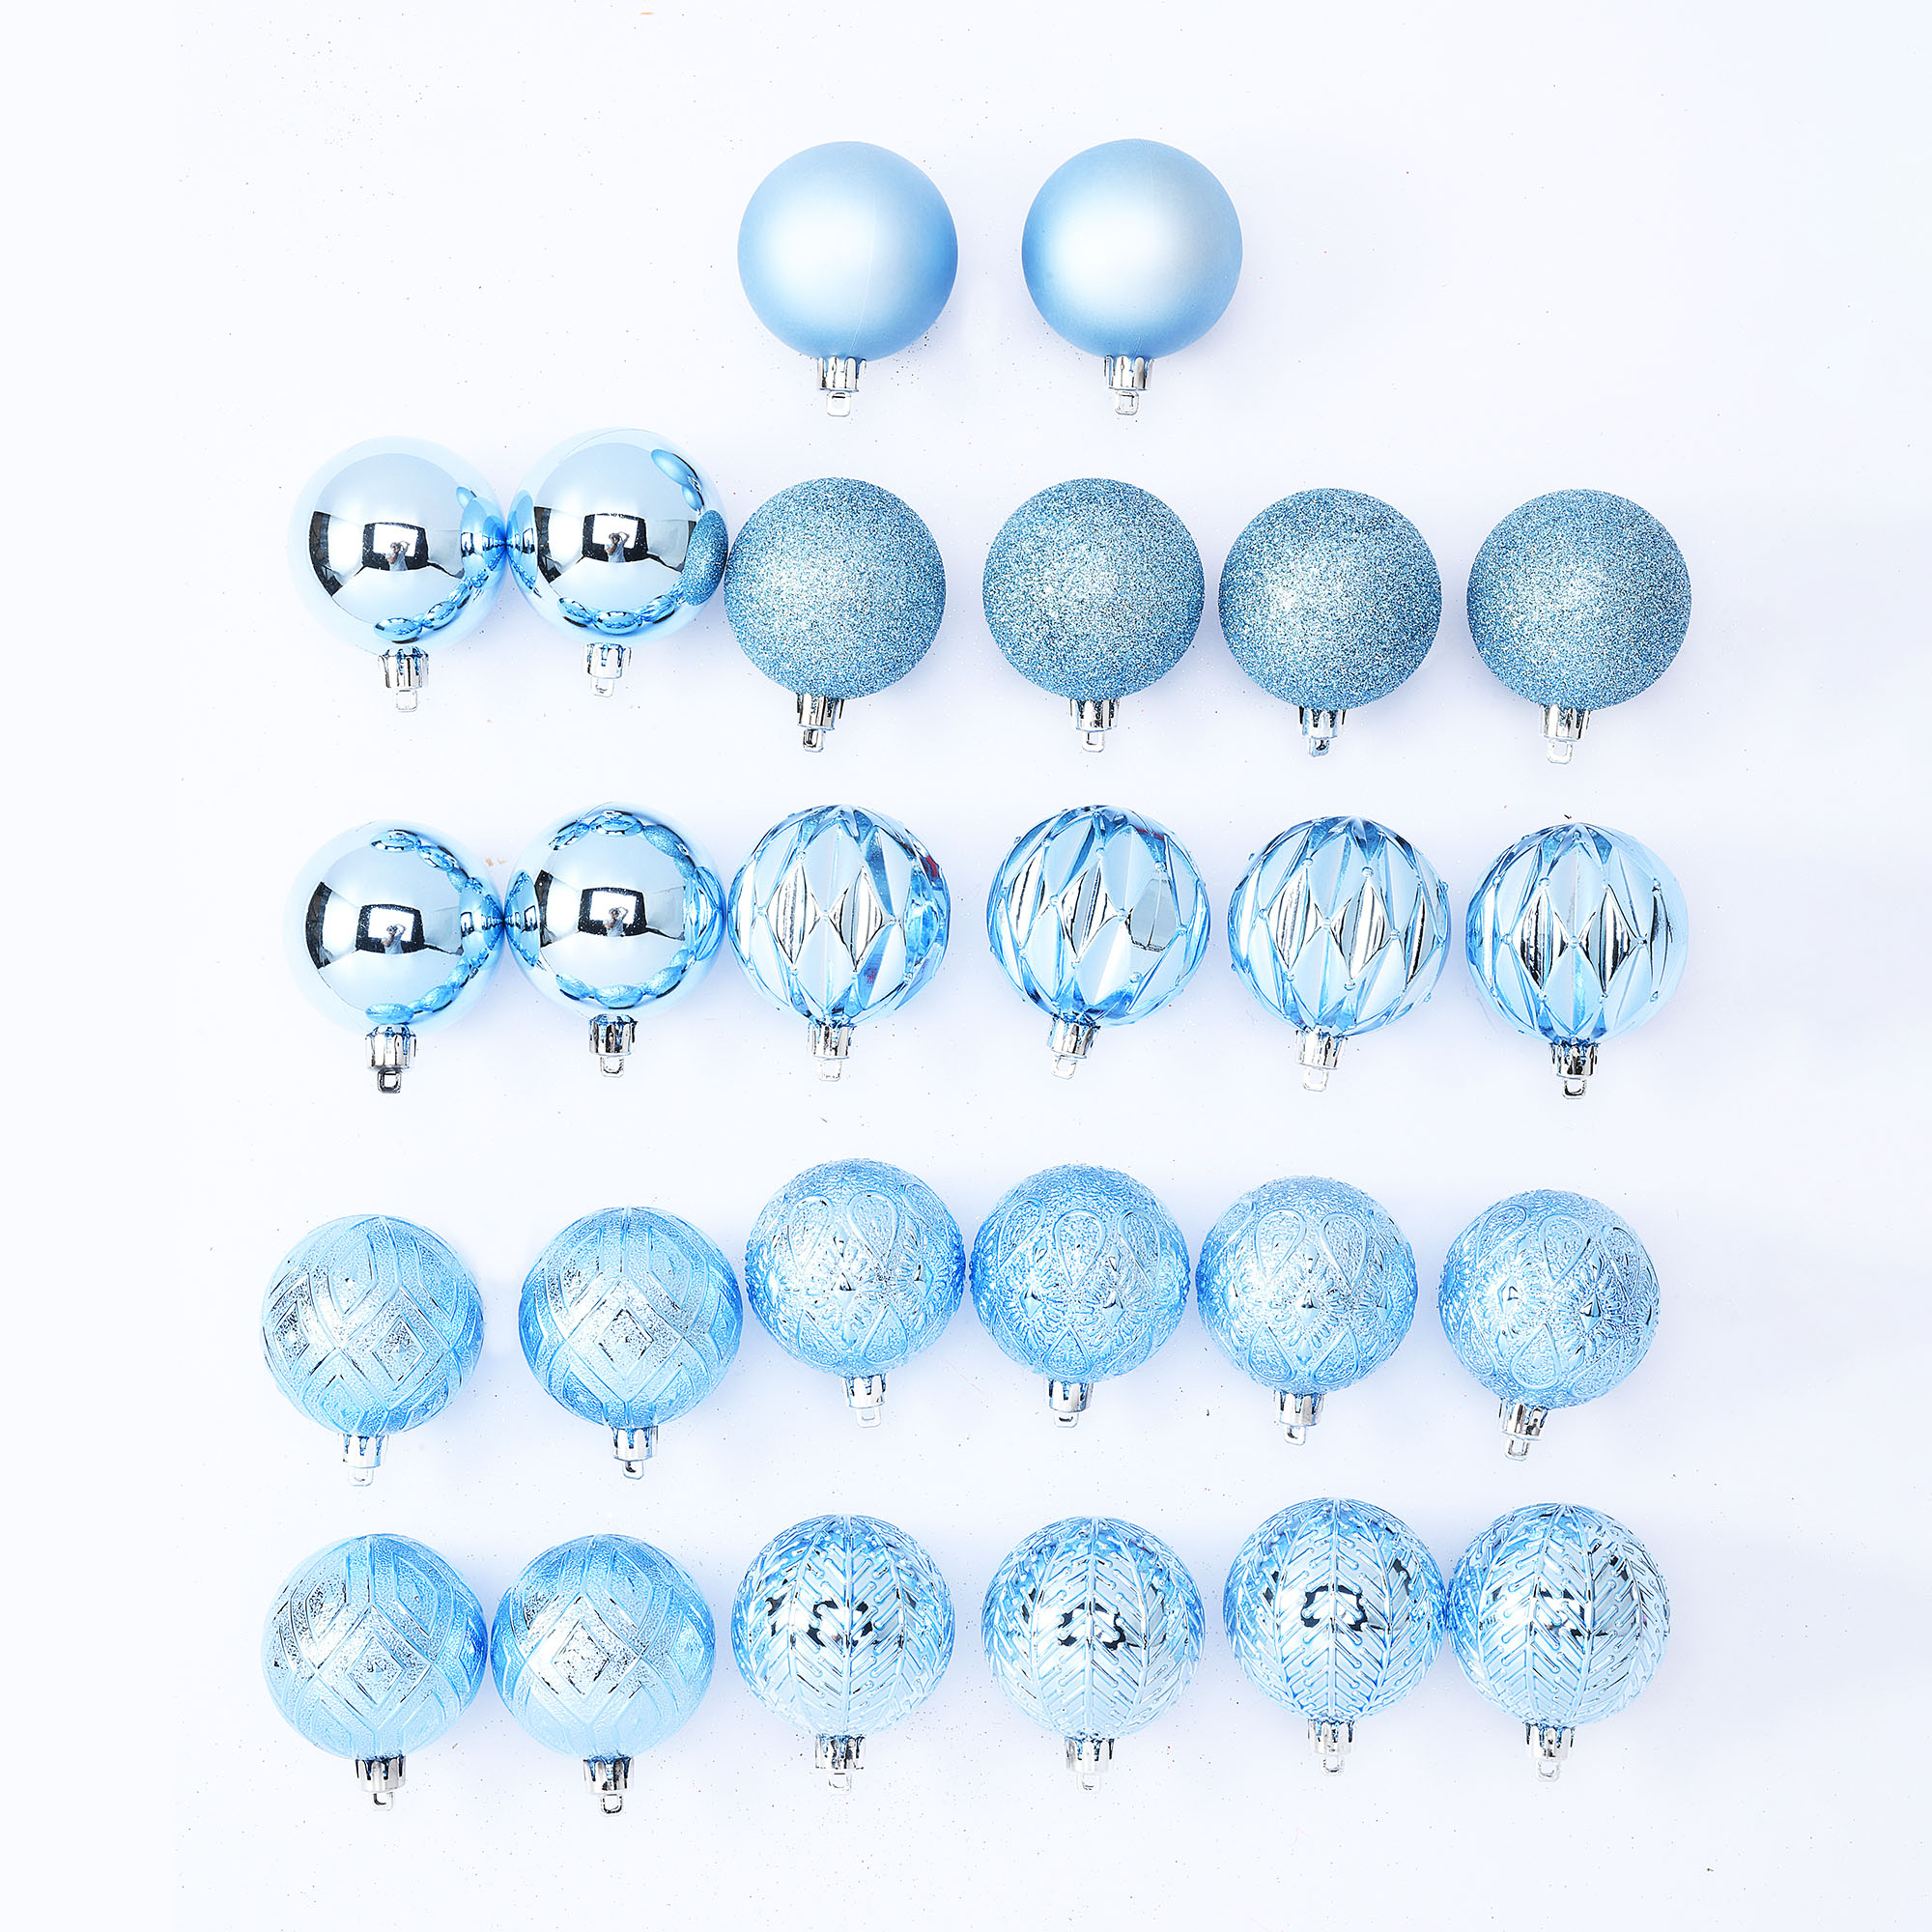 Holiday Time 60 mm Multi-textured Christmas Shatterproof Ornaments, Light Slate Blue, 26 Count - image 1 of 6